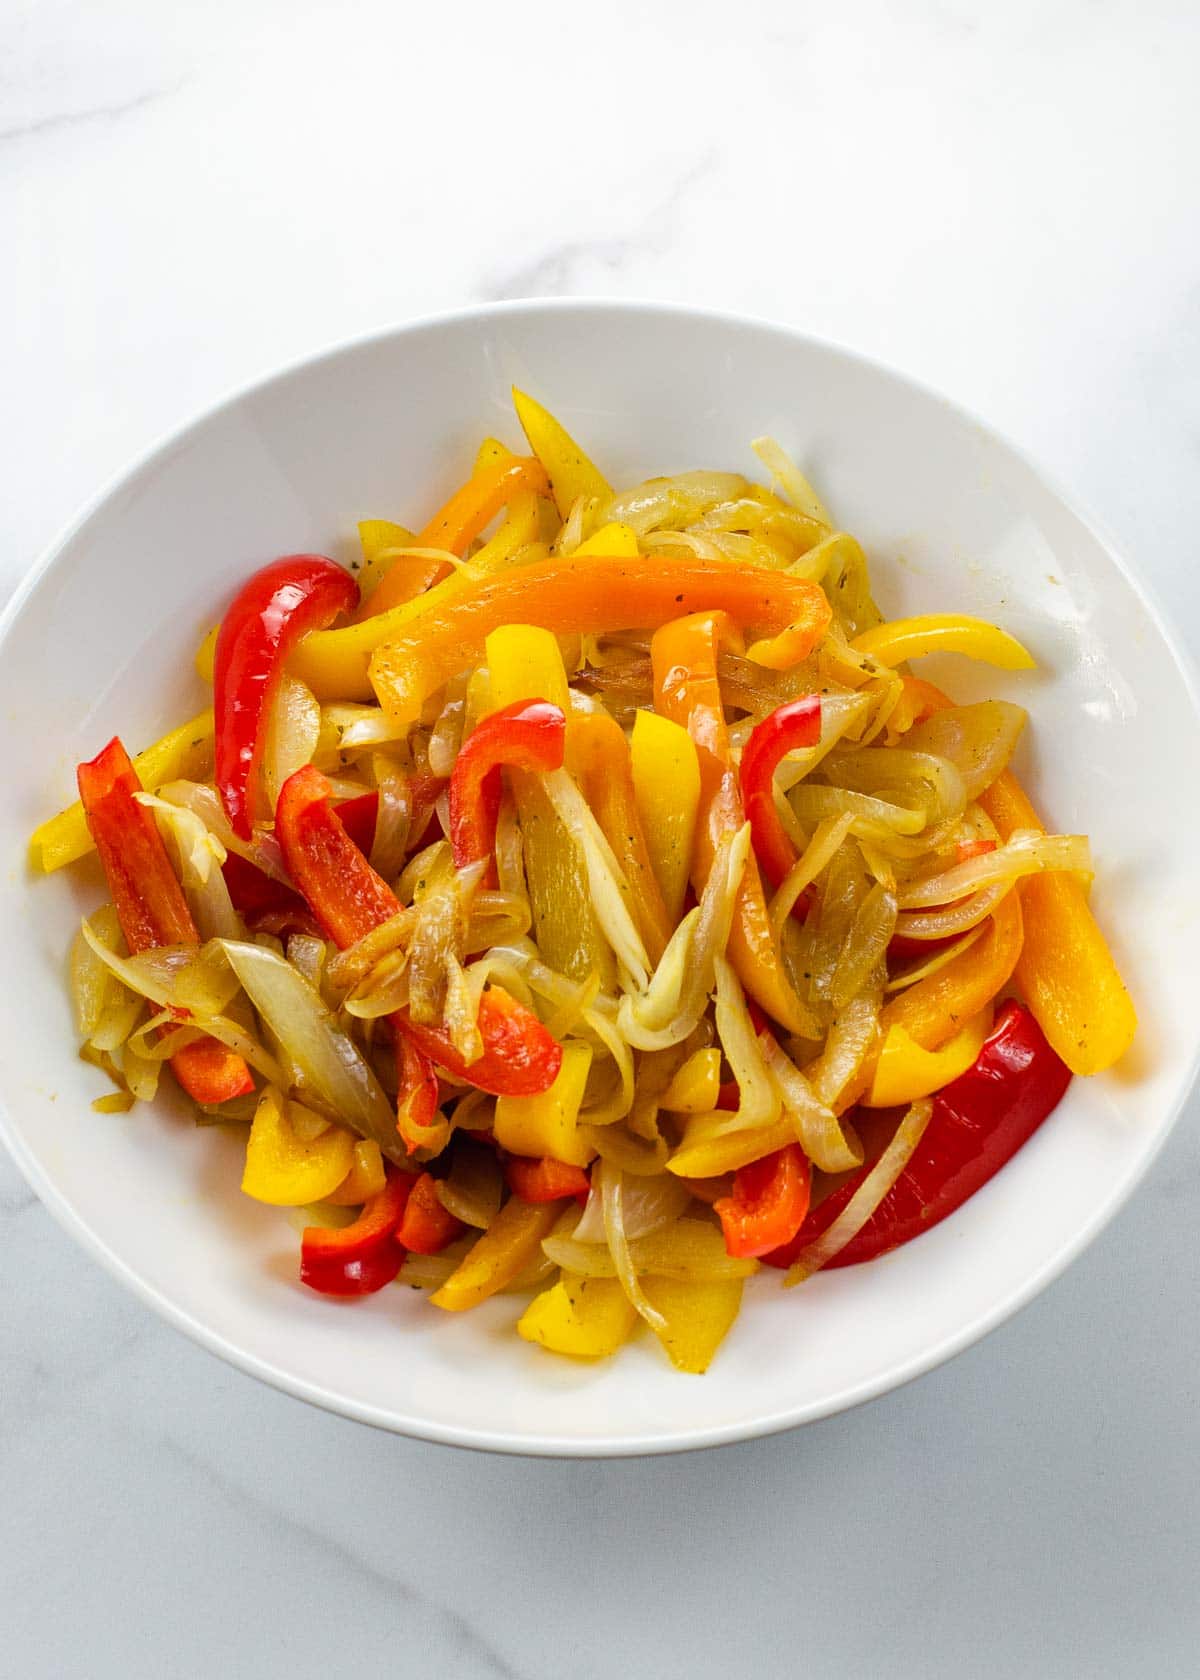 sauteed peppers and onions in a bowl